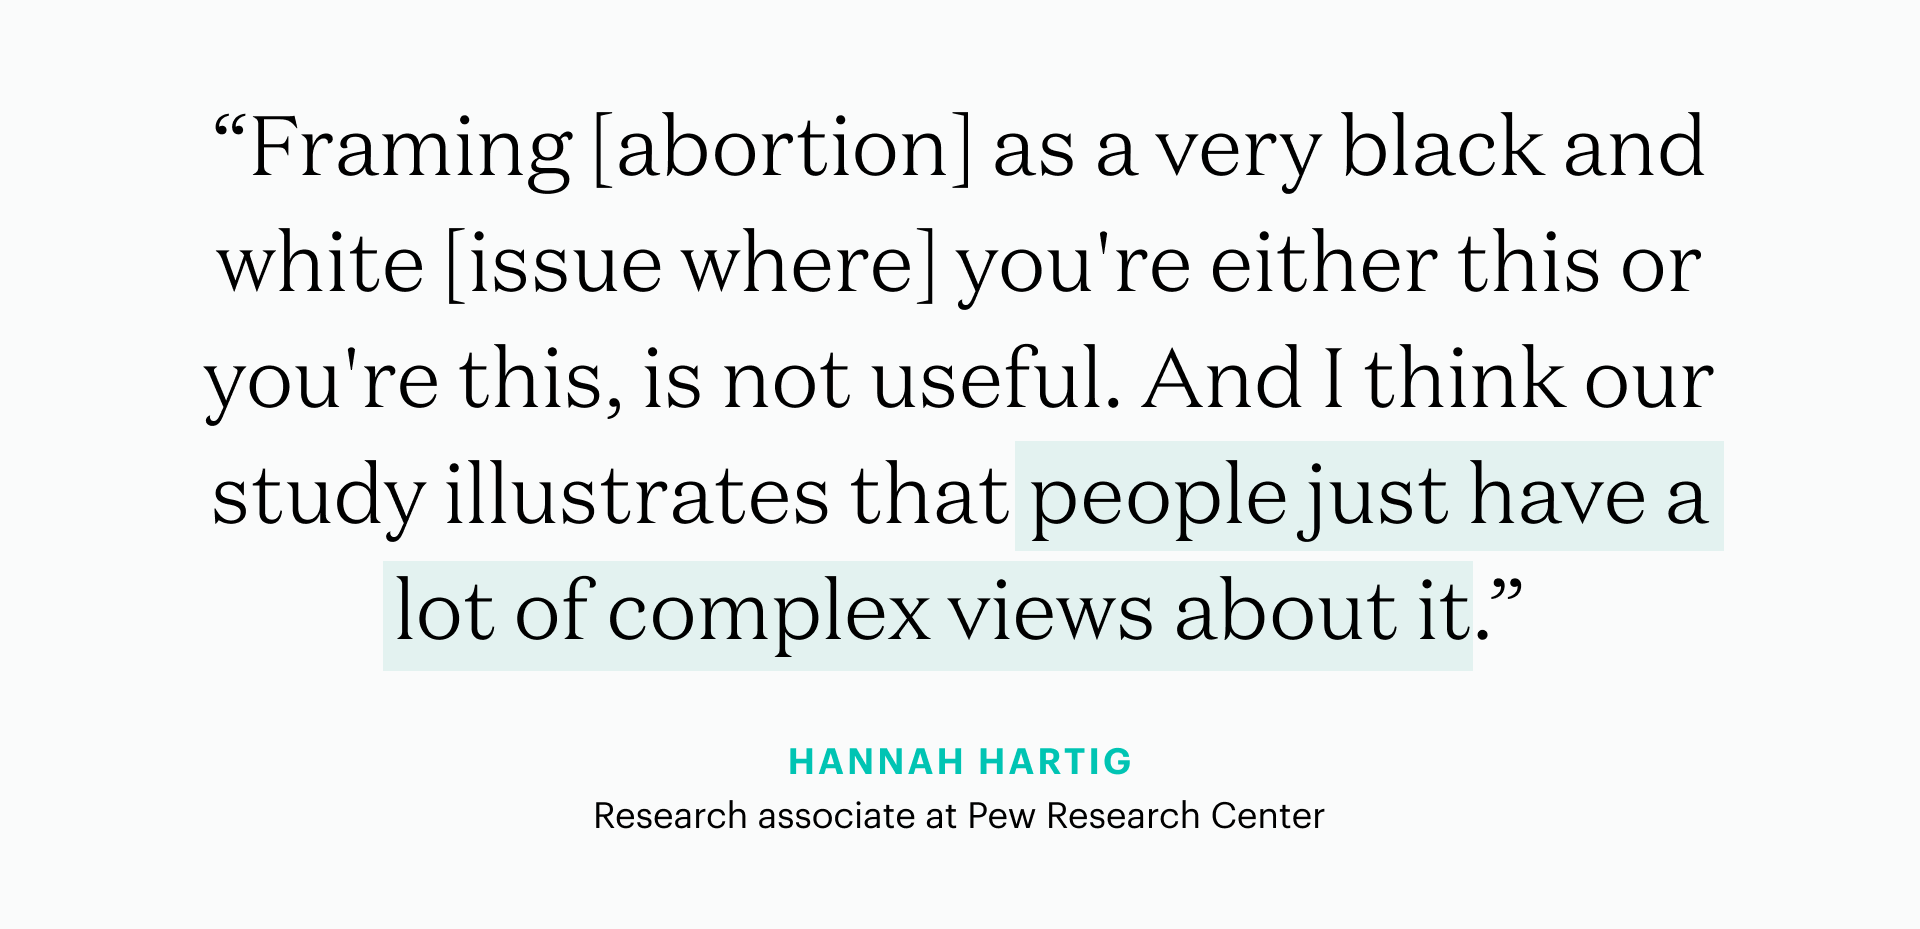 A quote from researcher Hannah Hartig